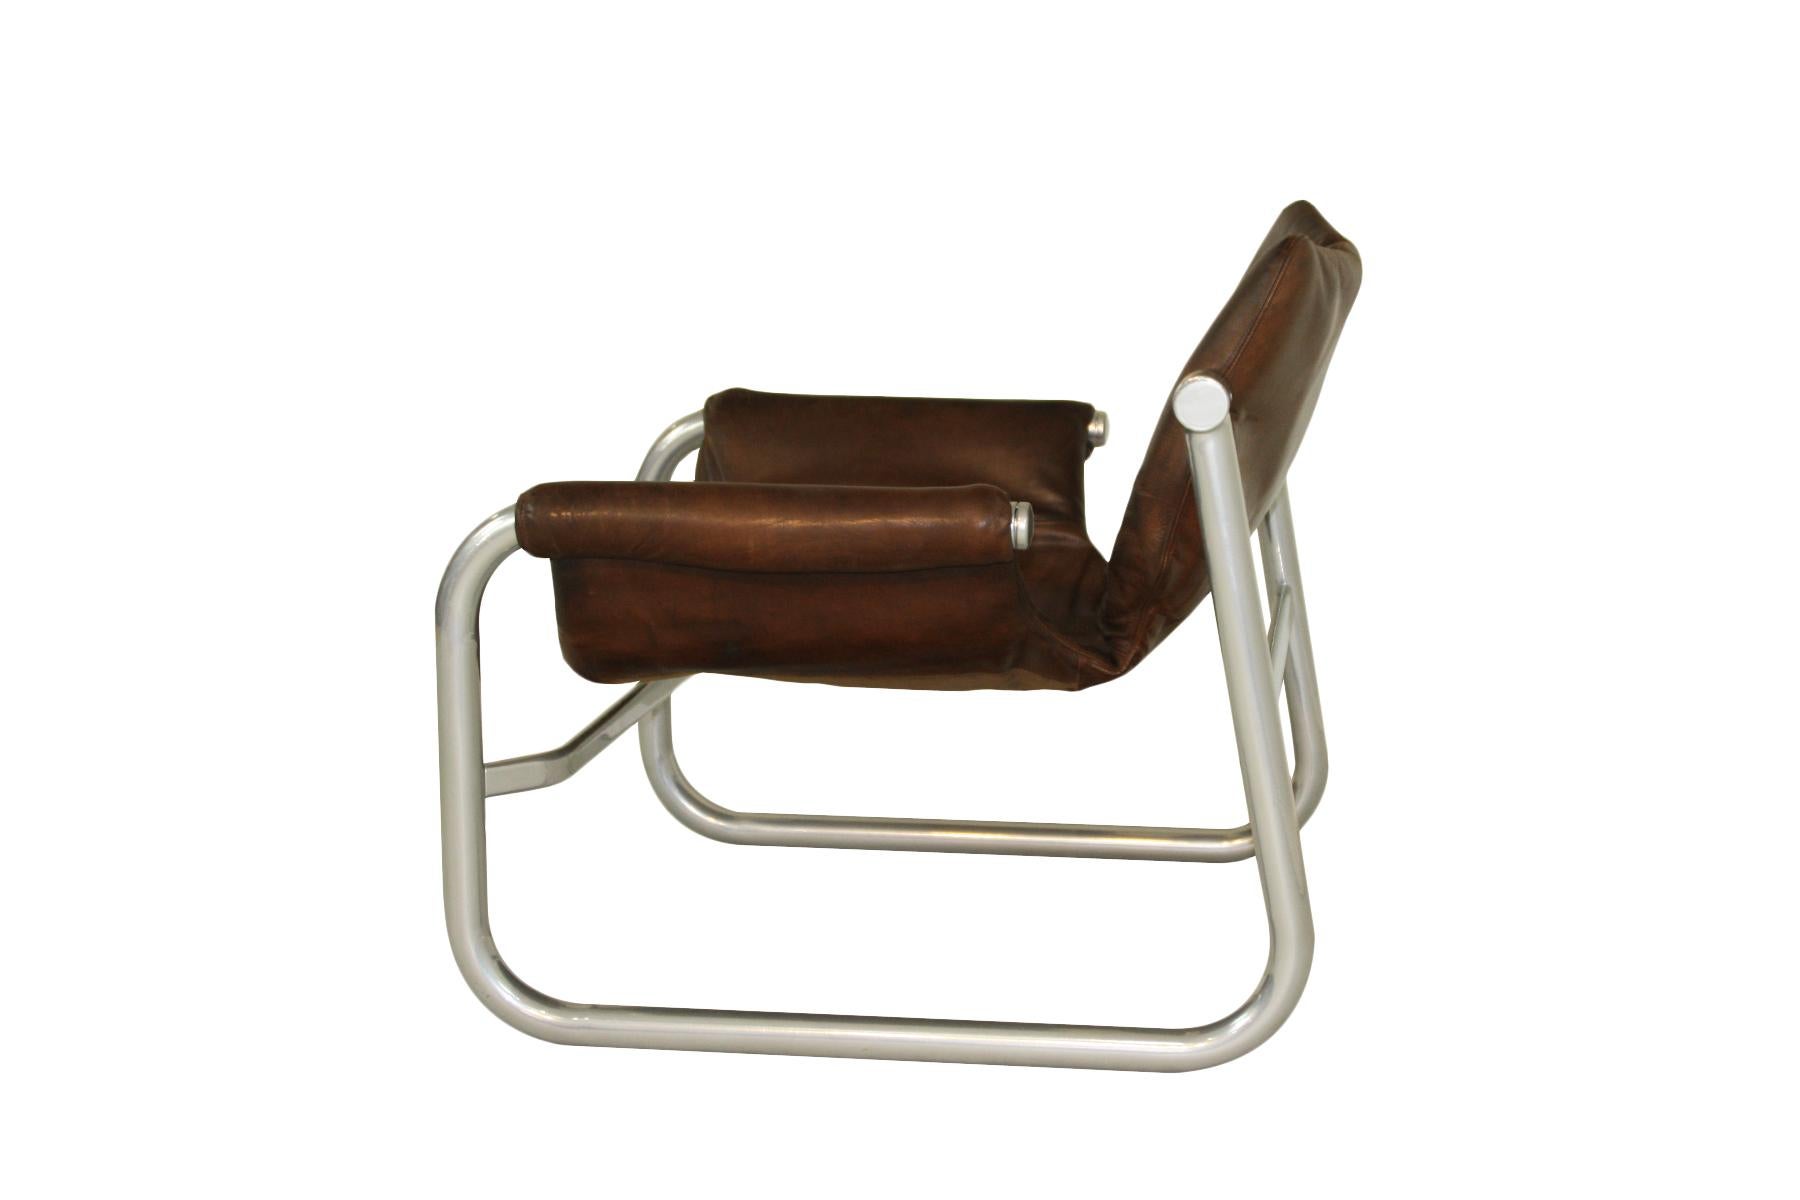 Lounge chair, 1960s Maurice Burke ‘Alpha’ leather sling chair for Pozza, Brazil.

There's not much I can tell you about Maurice Burke I'm afraid other than he was a designer from the mid-20th century who designed a number of pieces of furniture